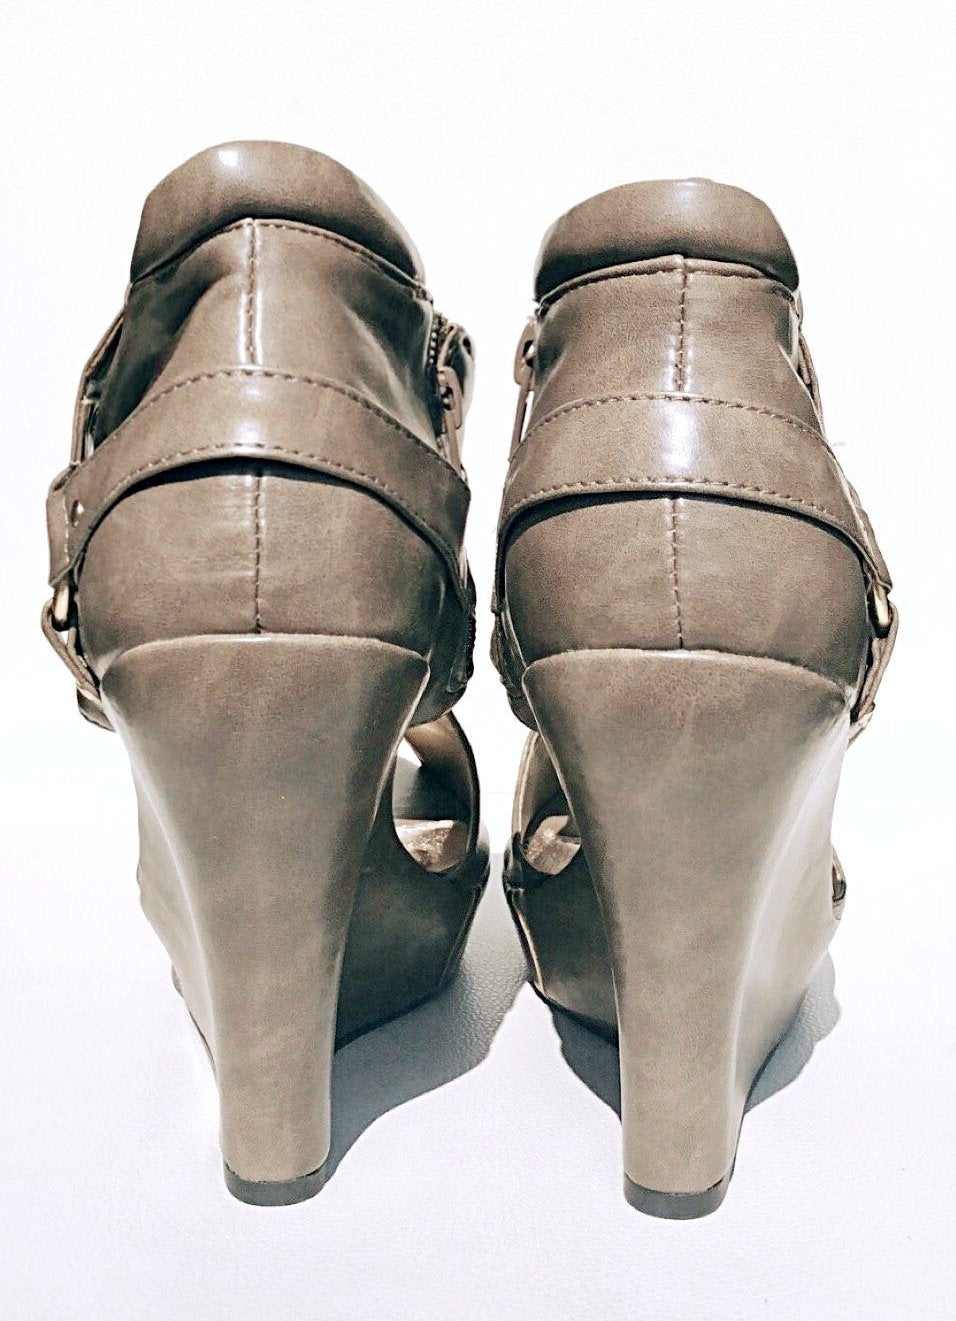 Taupe Wedge Booties Sandals-Seduced - LABELSHOES